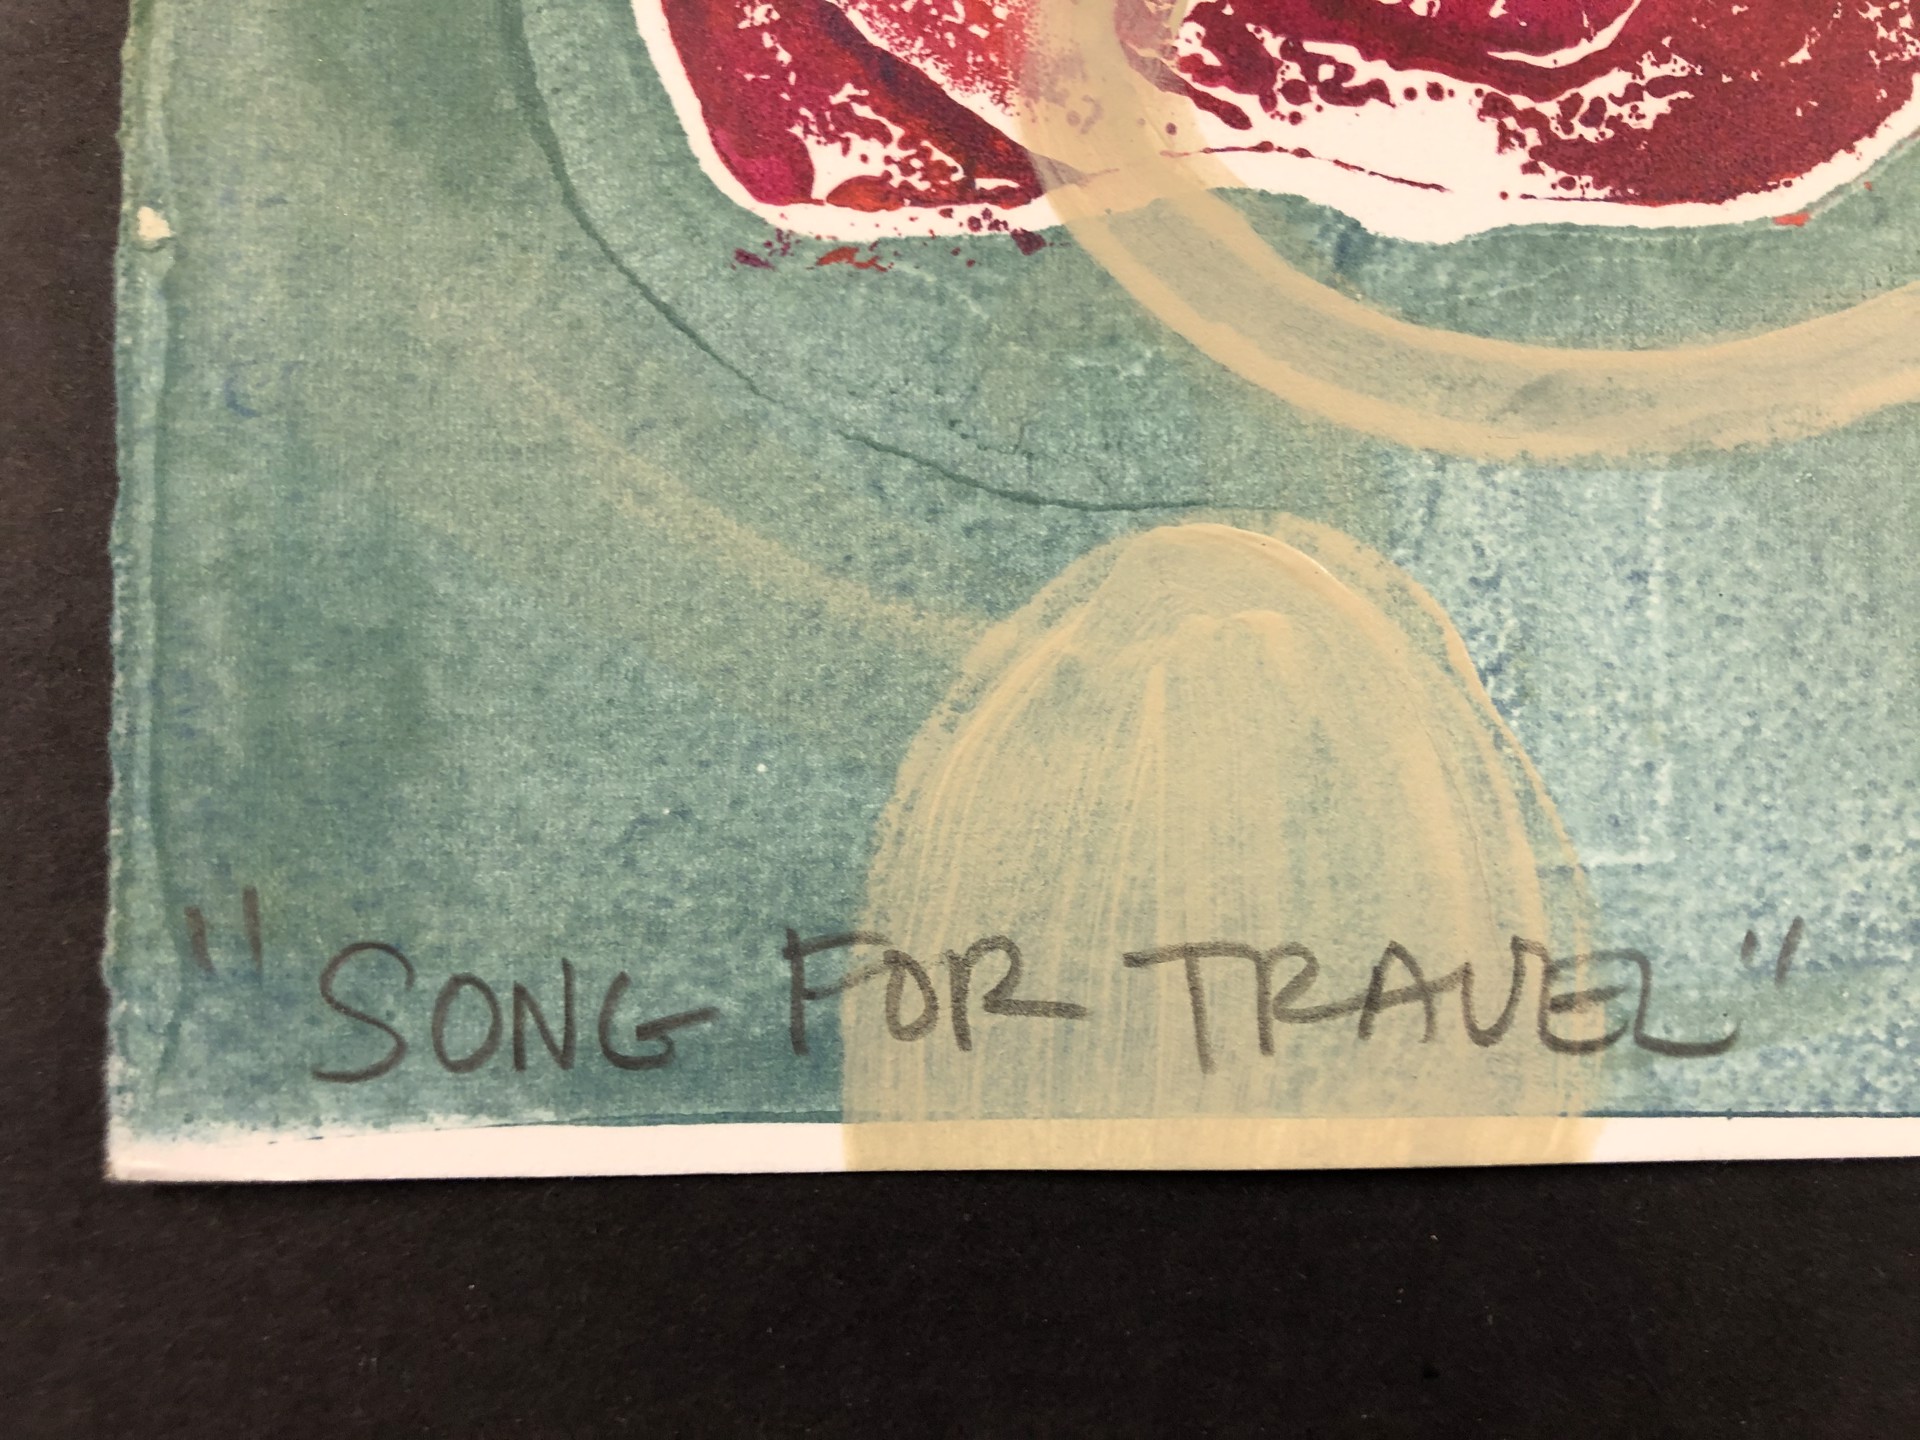 Song For Travel by Melanie Yazzie